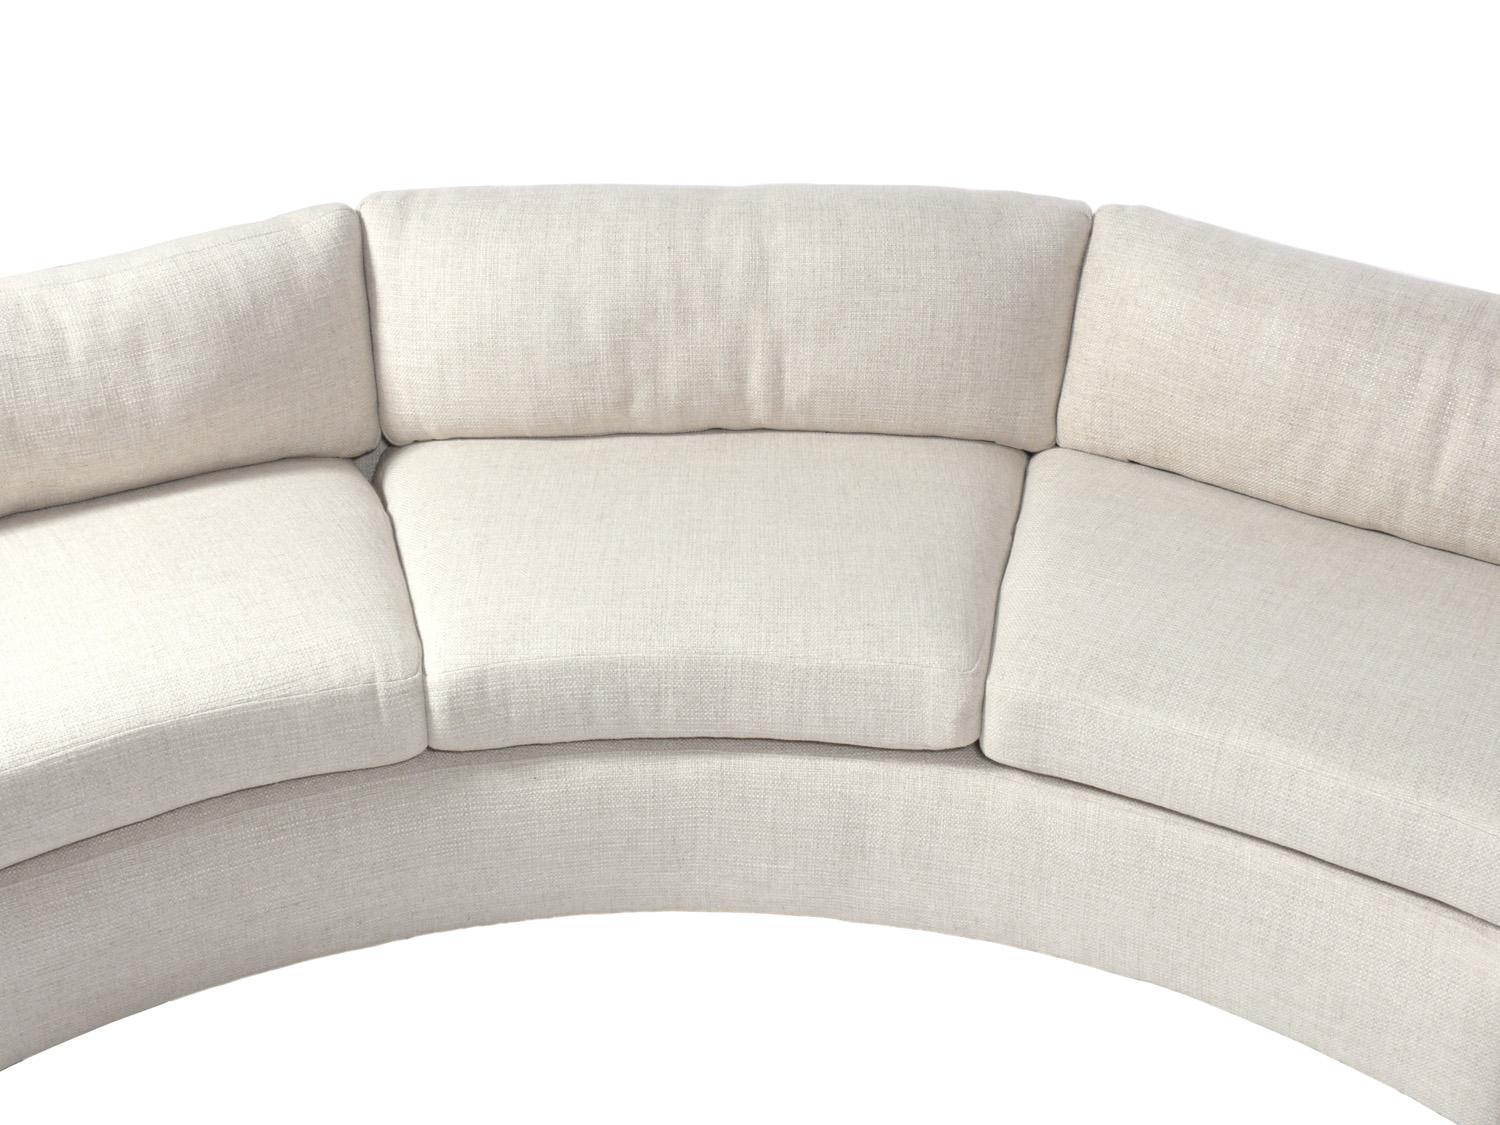 Large scale curved sectional sofa, designed by Milo Baughman for Thayer Coggin, American, circa 1960s. Reupholstered in a sumptuous Pierre Frey ivory color linen style fabric. It is a two section sofa for easier moving.

It measures 164